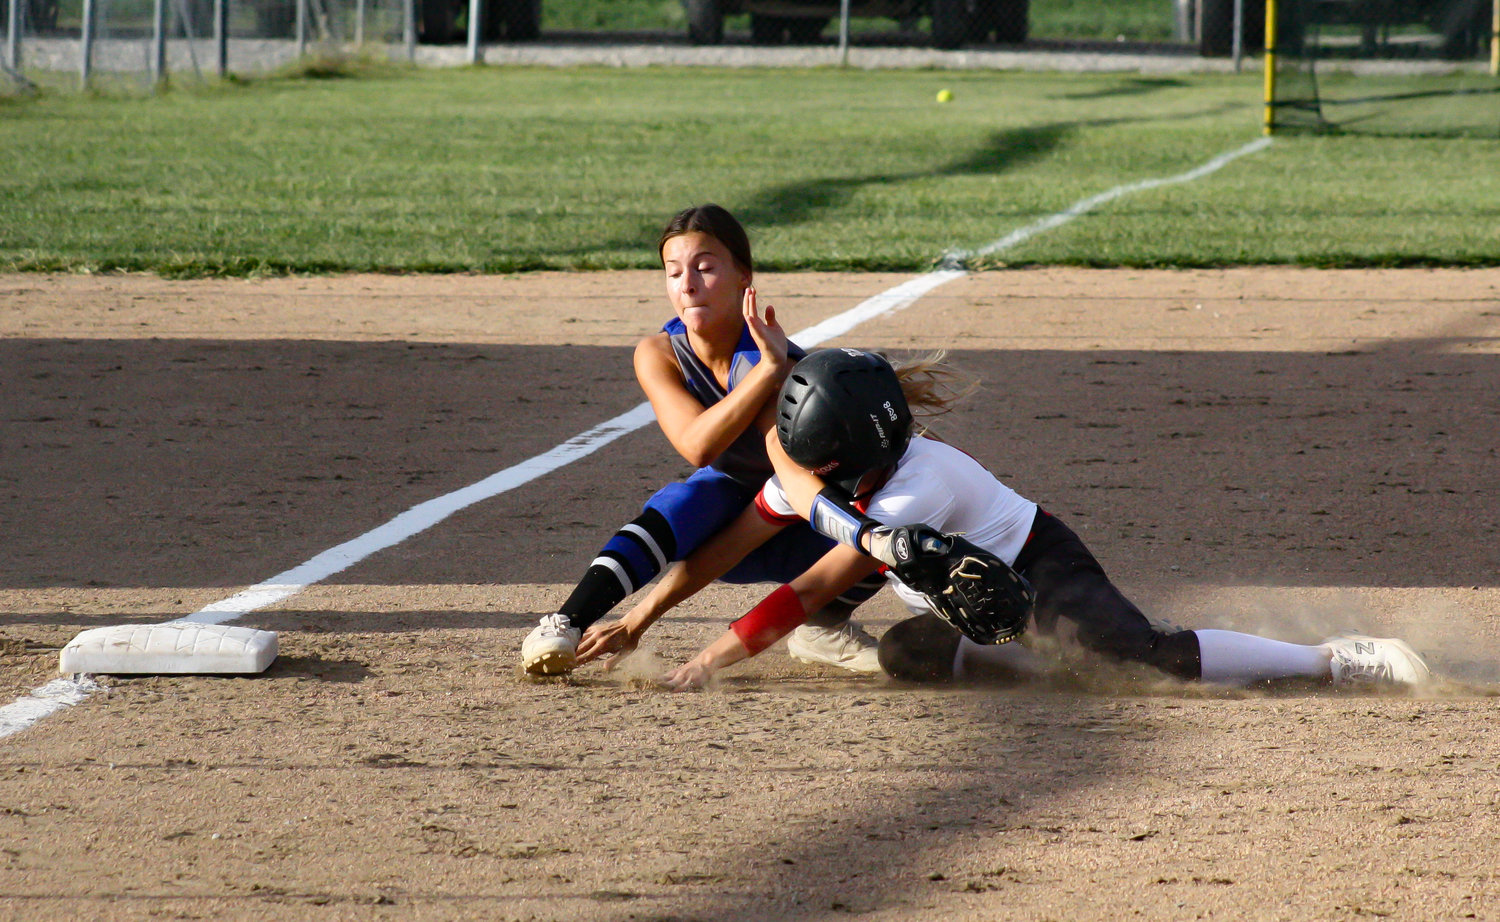 Community R-6 senior shortstop Sarah Angel slides into New Franklin third baseman Addy Salmon in the Lady Trojans' 7-1 loss Monday in Laddonia. Angel reached base in all three of her plate appearances but was thrown out trying to steal third base.